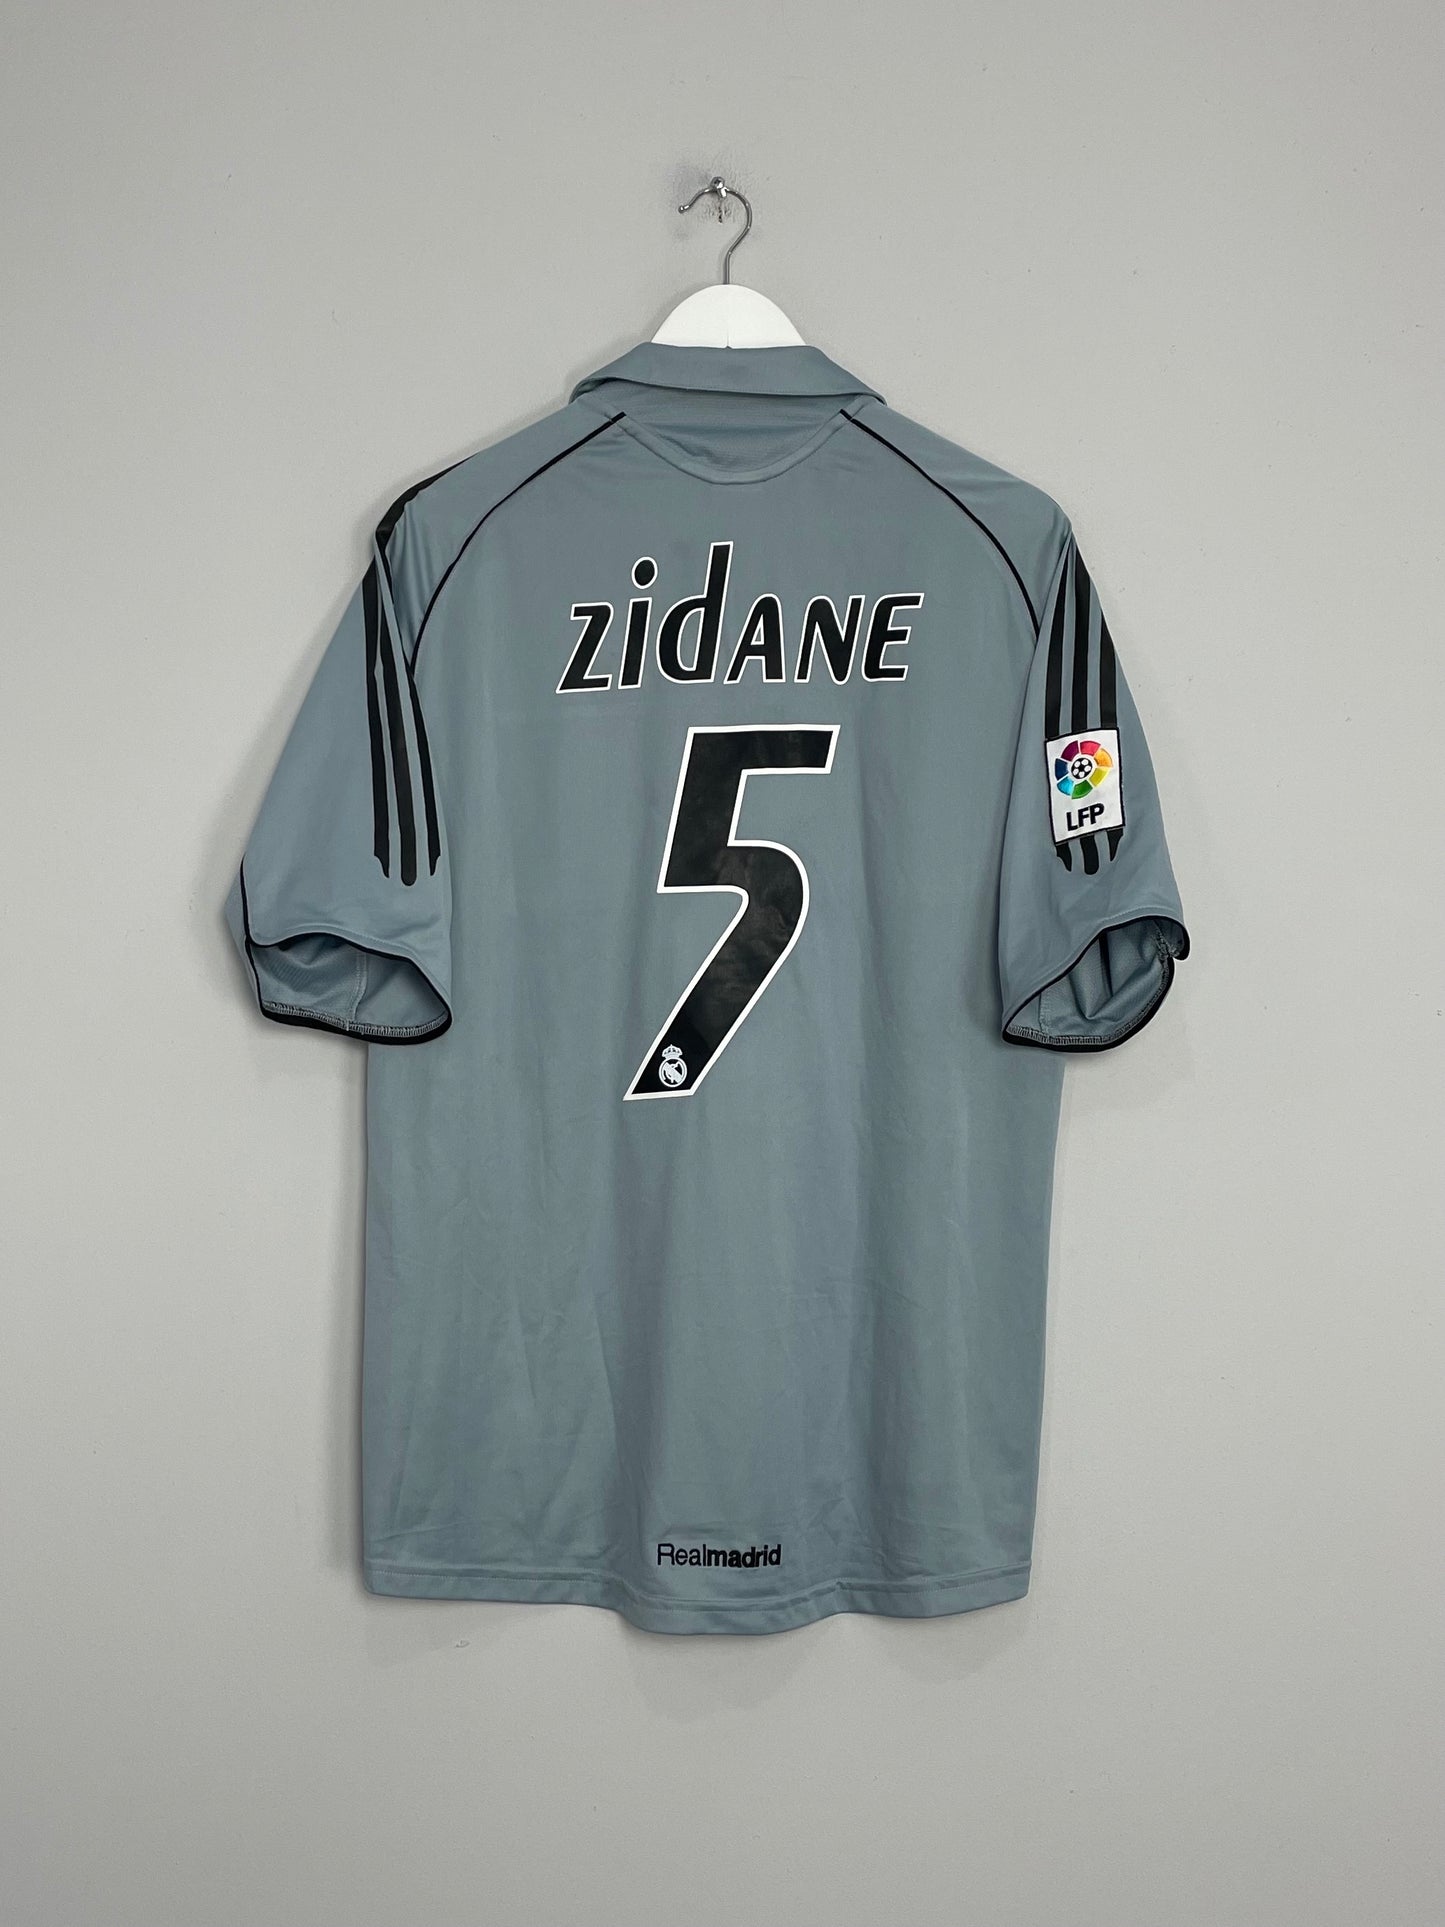 Image of the Real Madrid Zidane shirt from the 2005/06 season